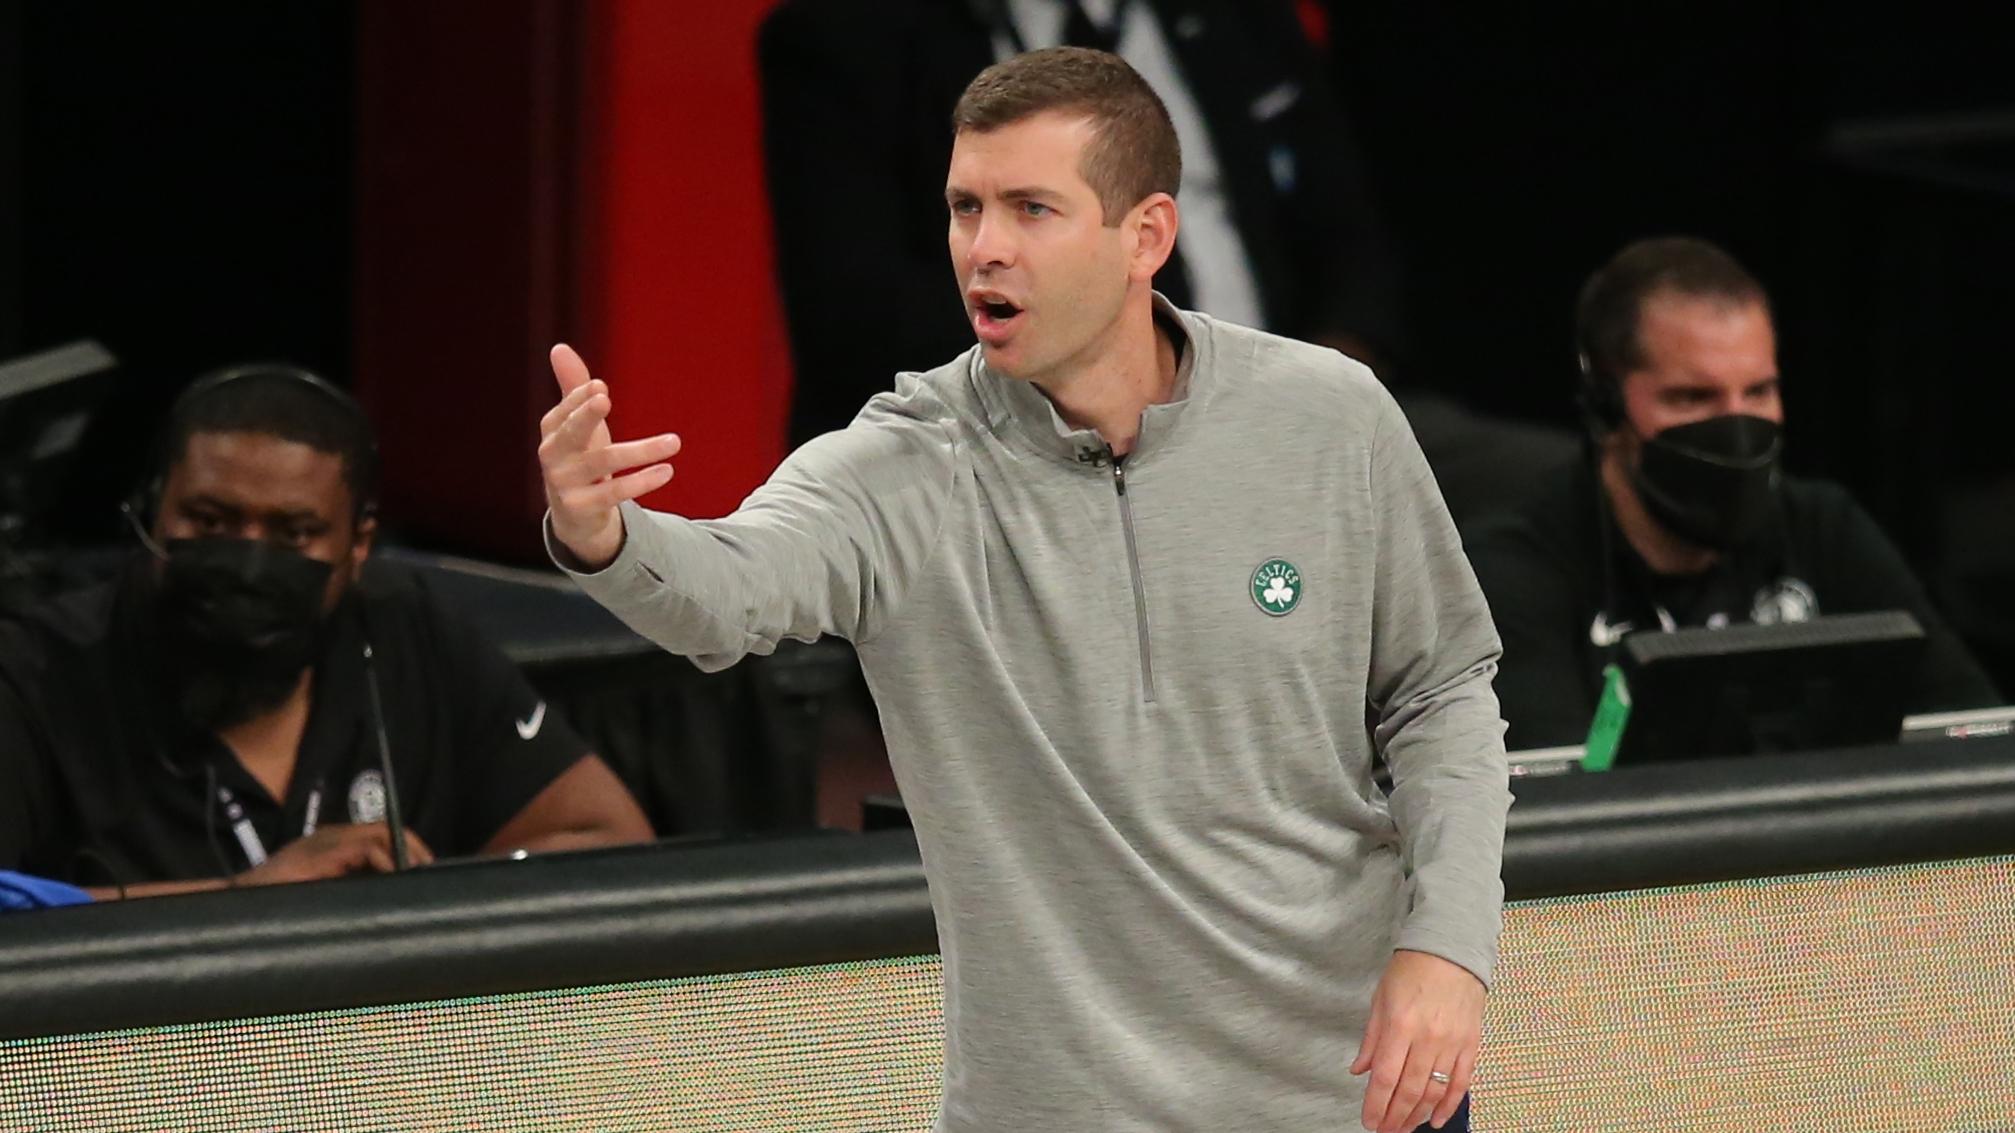 Boston Celtics head coach Brad Stevens coaches his team against the Brooklyn Nets during the second quarter of game five of the first round of the 2021 NBA Playoffs at Barclays Center. / Brad Penner-USA TODAY Sports